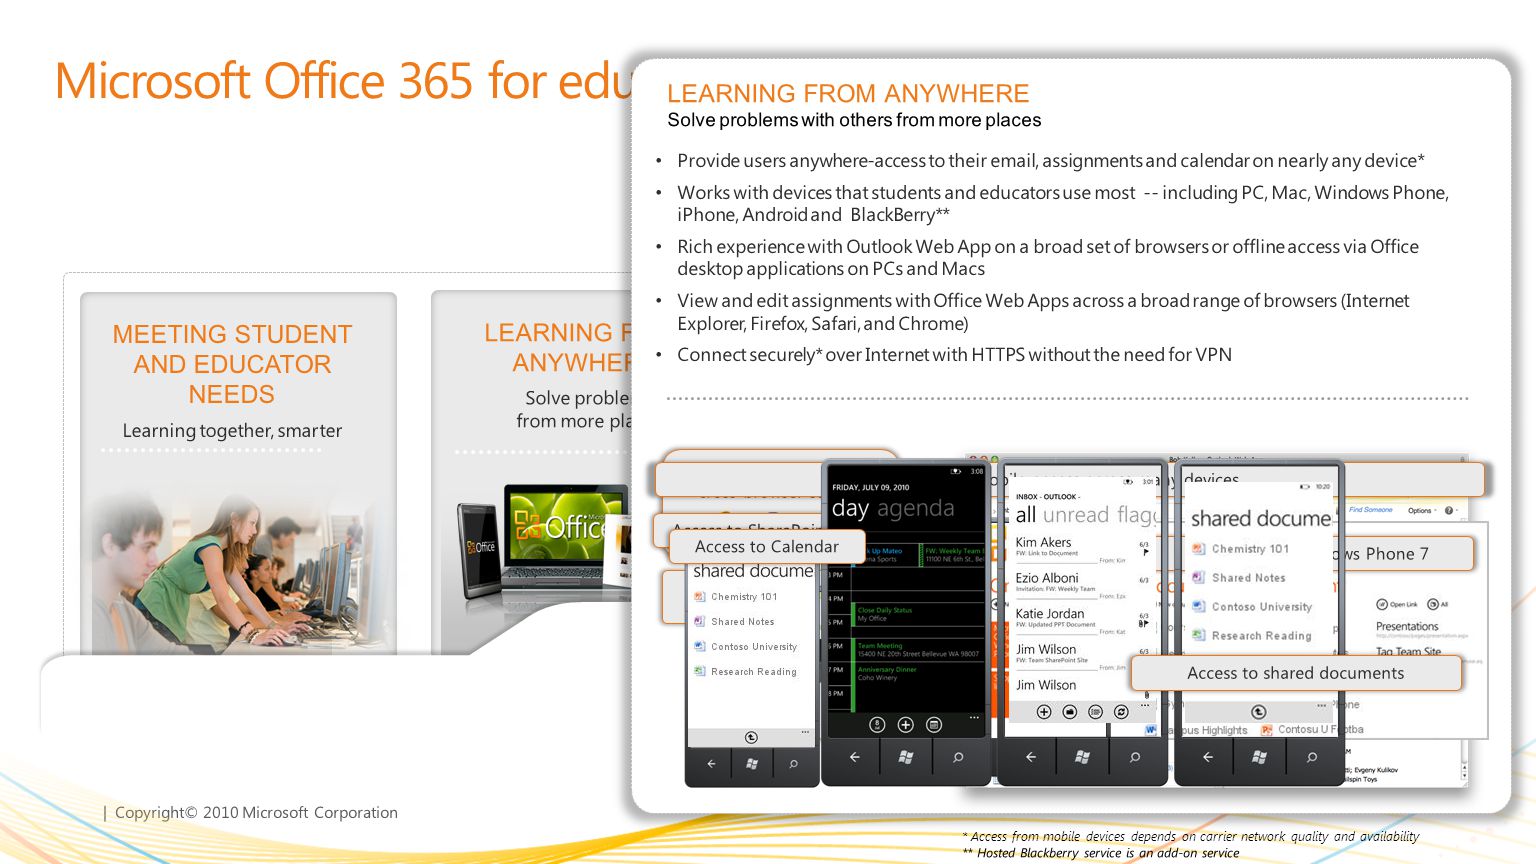 Microsoft Office 365 for education Value